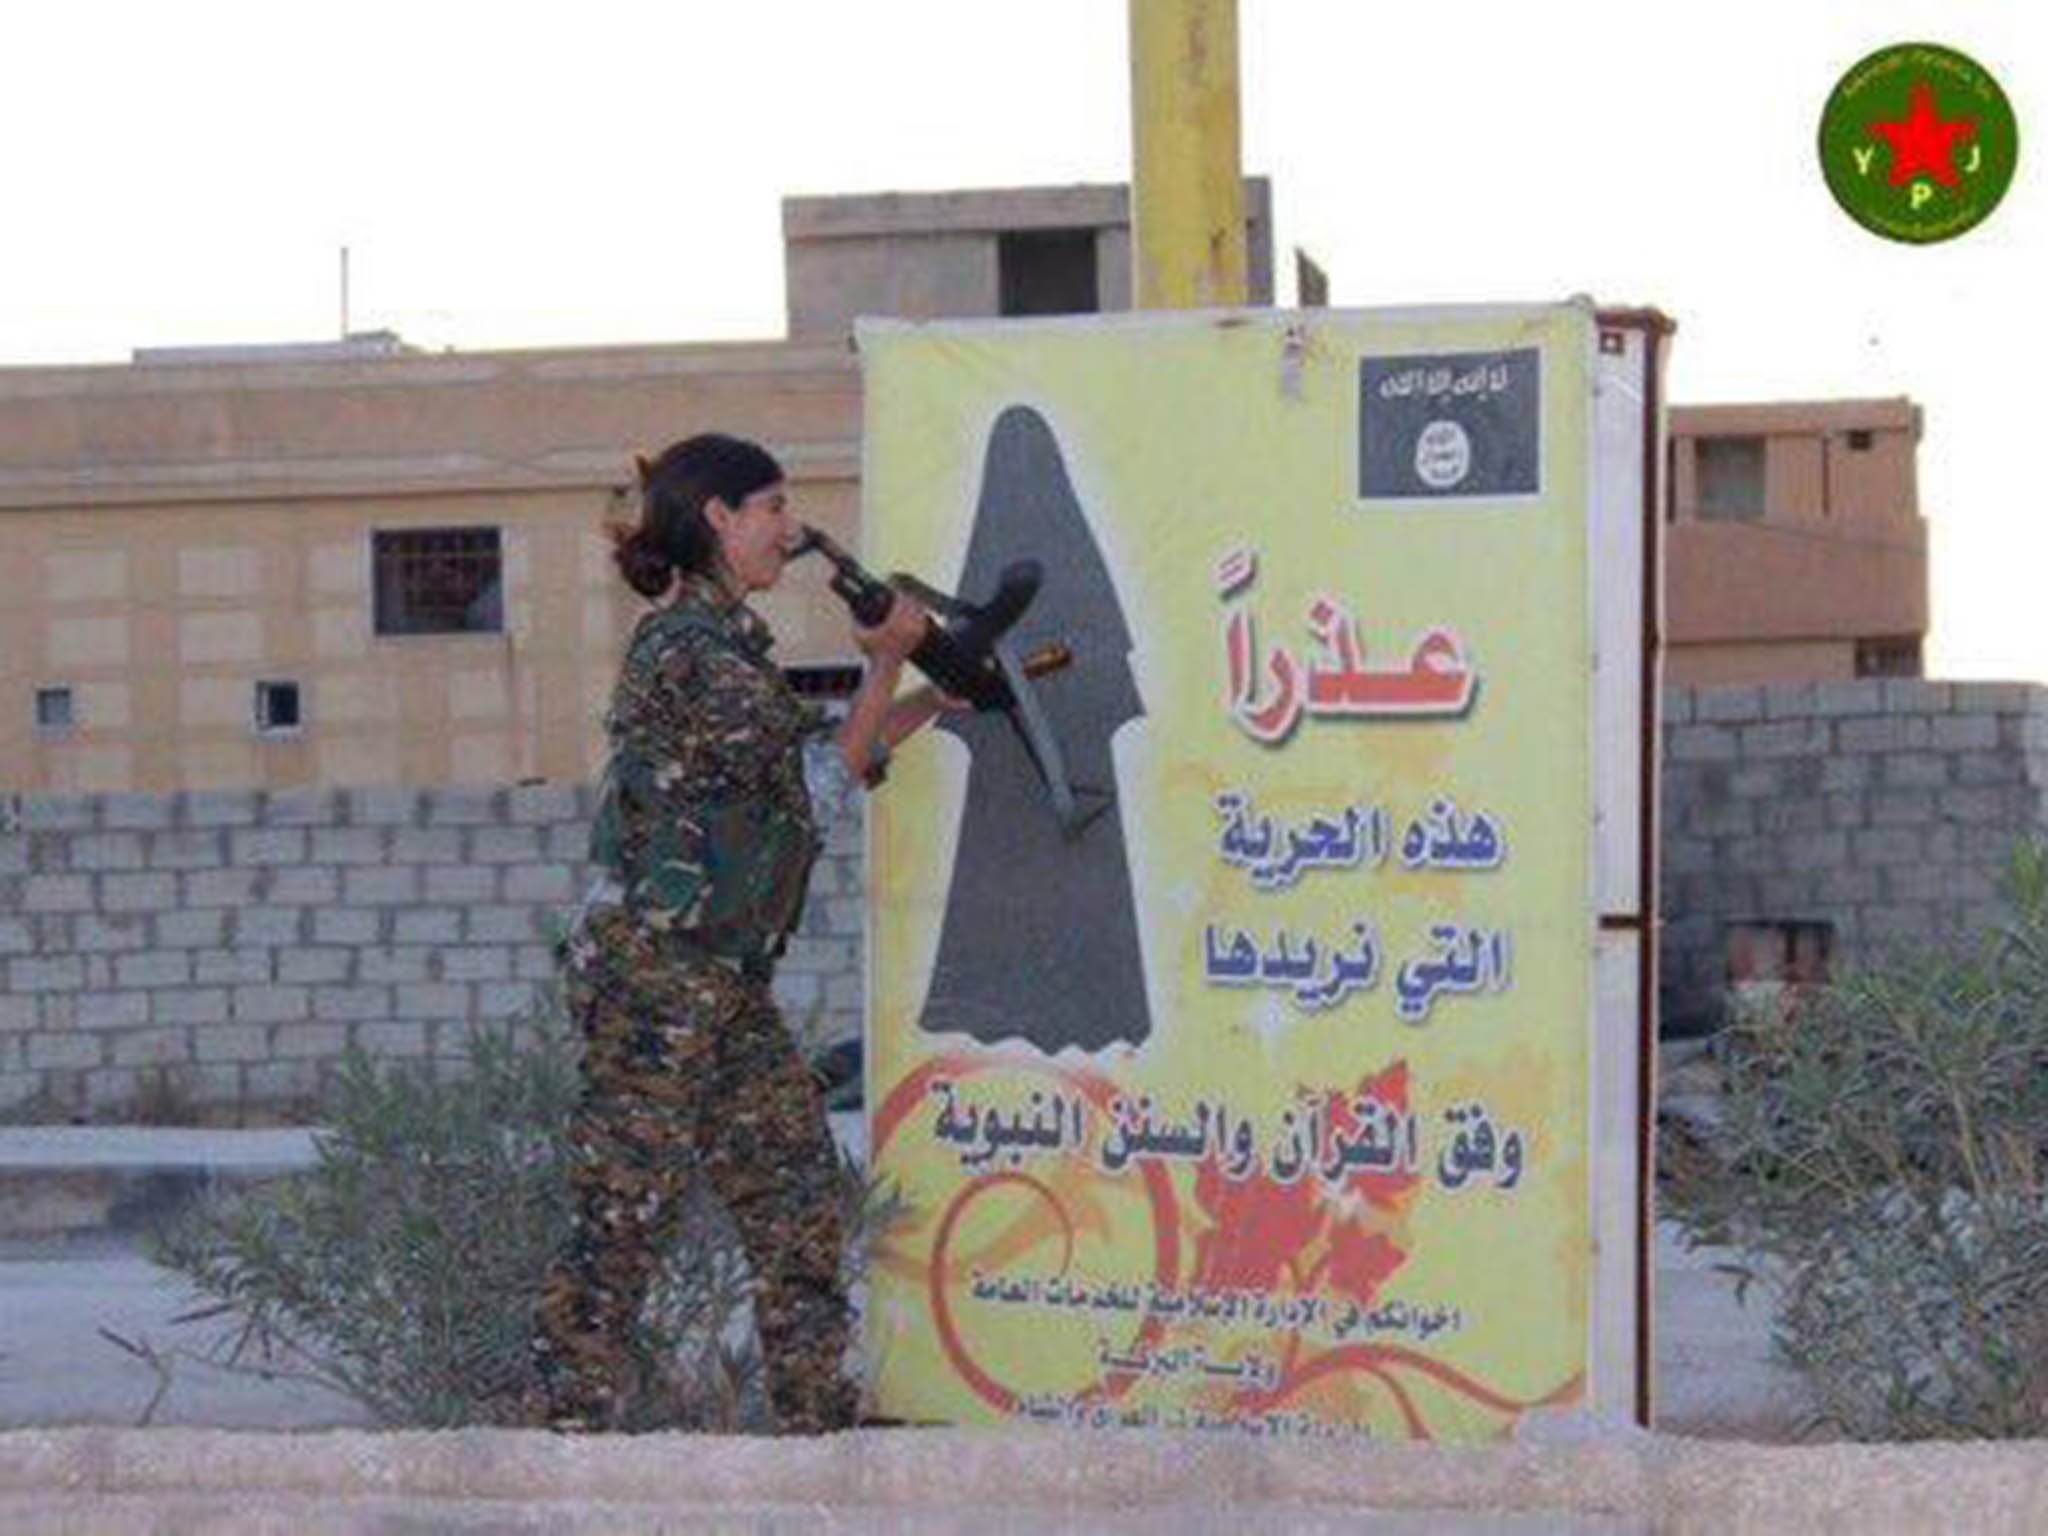 The large sign gives instructions on how women should dress in the region